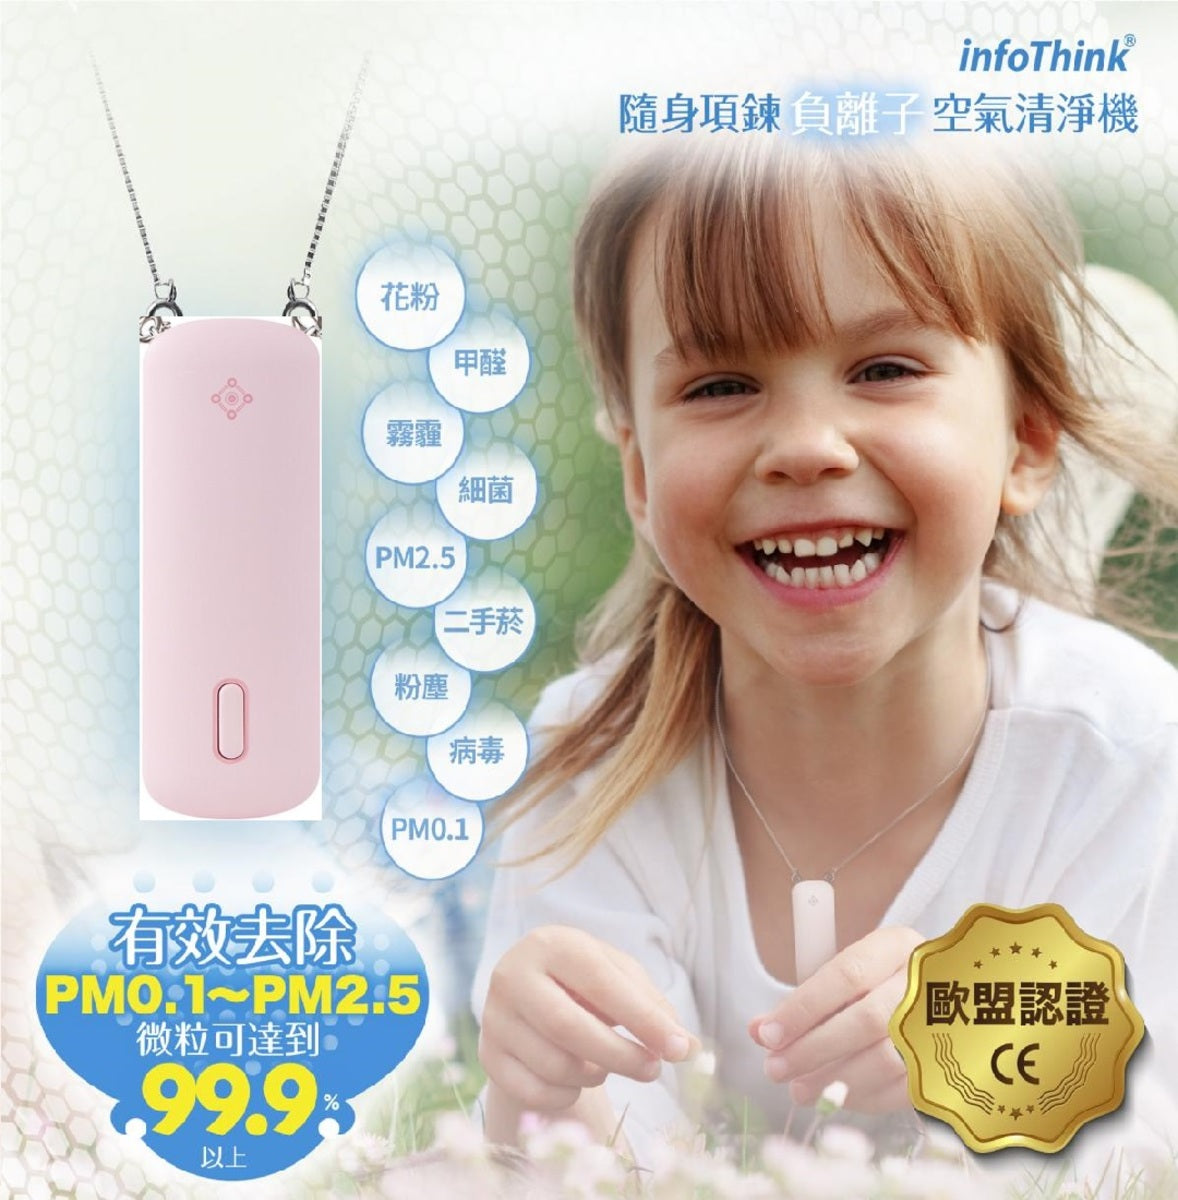 Xunxiang Technology - iAnion-100 Portable Necklace Negative Ion Air Purifier - Pink [Made in Taiwan. Hong Kong licensed goods]